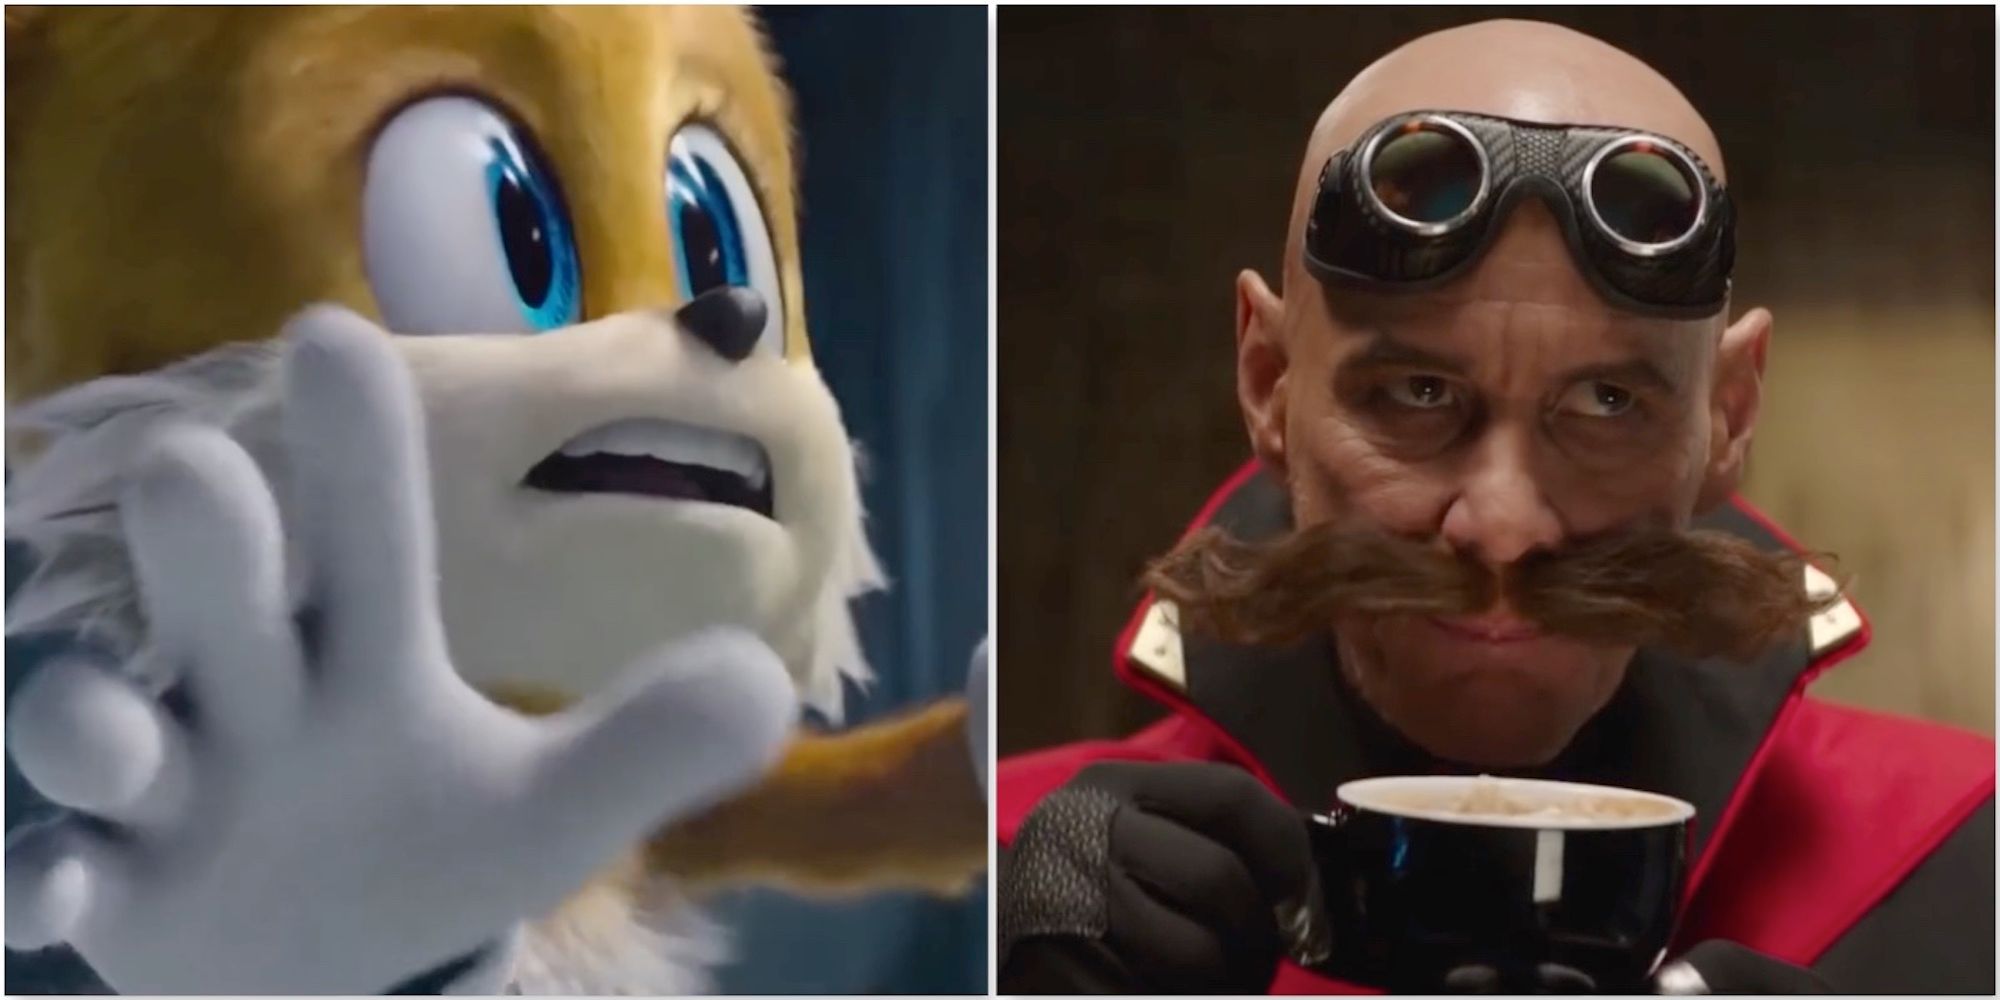 Tails and Dr. Robotnik in Sonic the Hedgehog 2